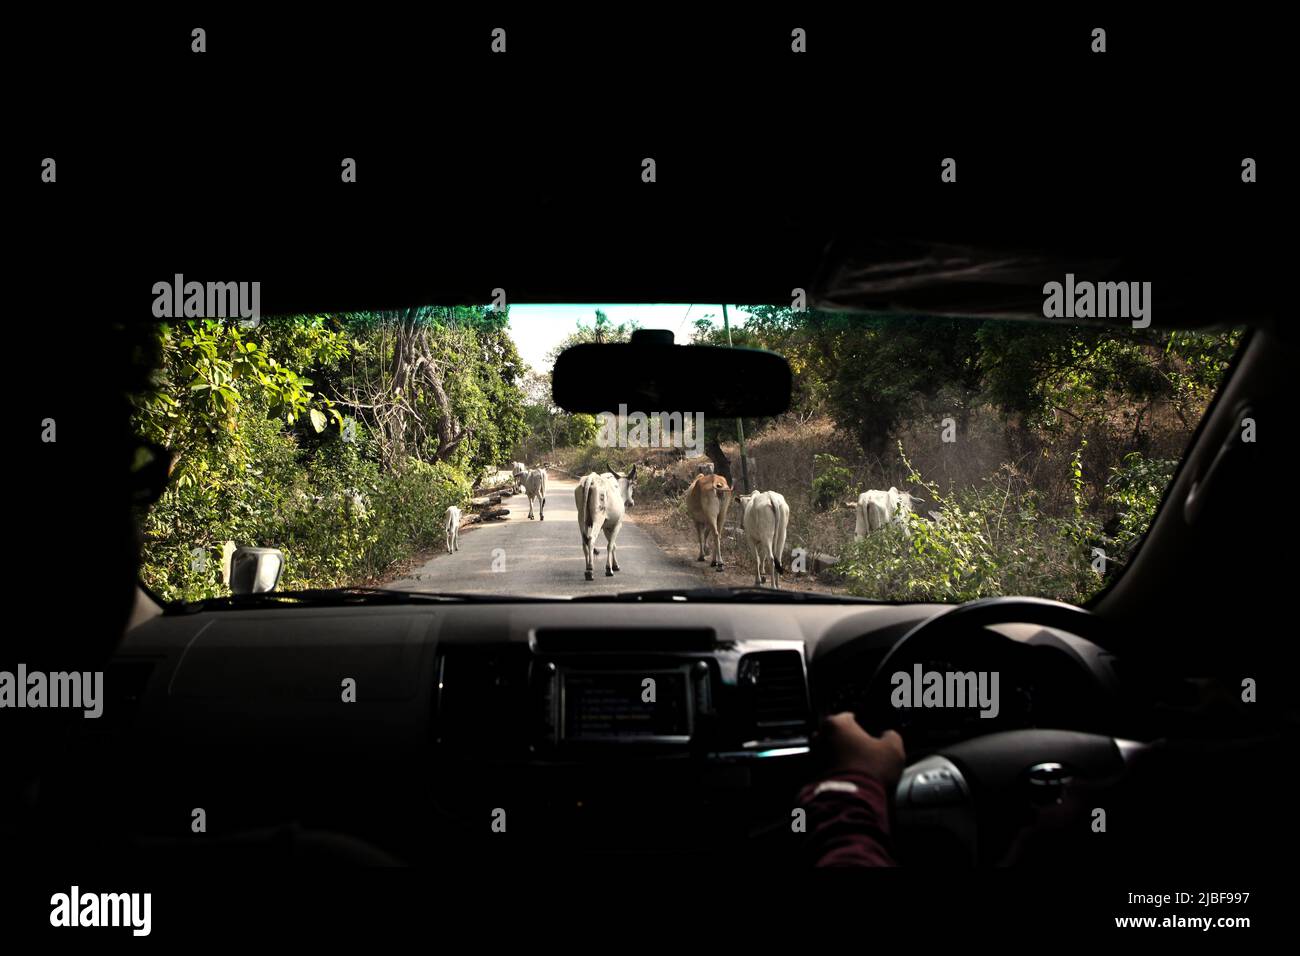 A herd of cattles walking on a rural road in front of a moving car in East Sumba, East Nusa Tenggara, Indonesia. Stock Photo